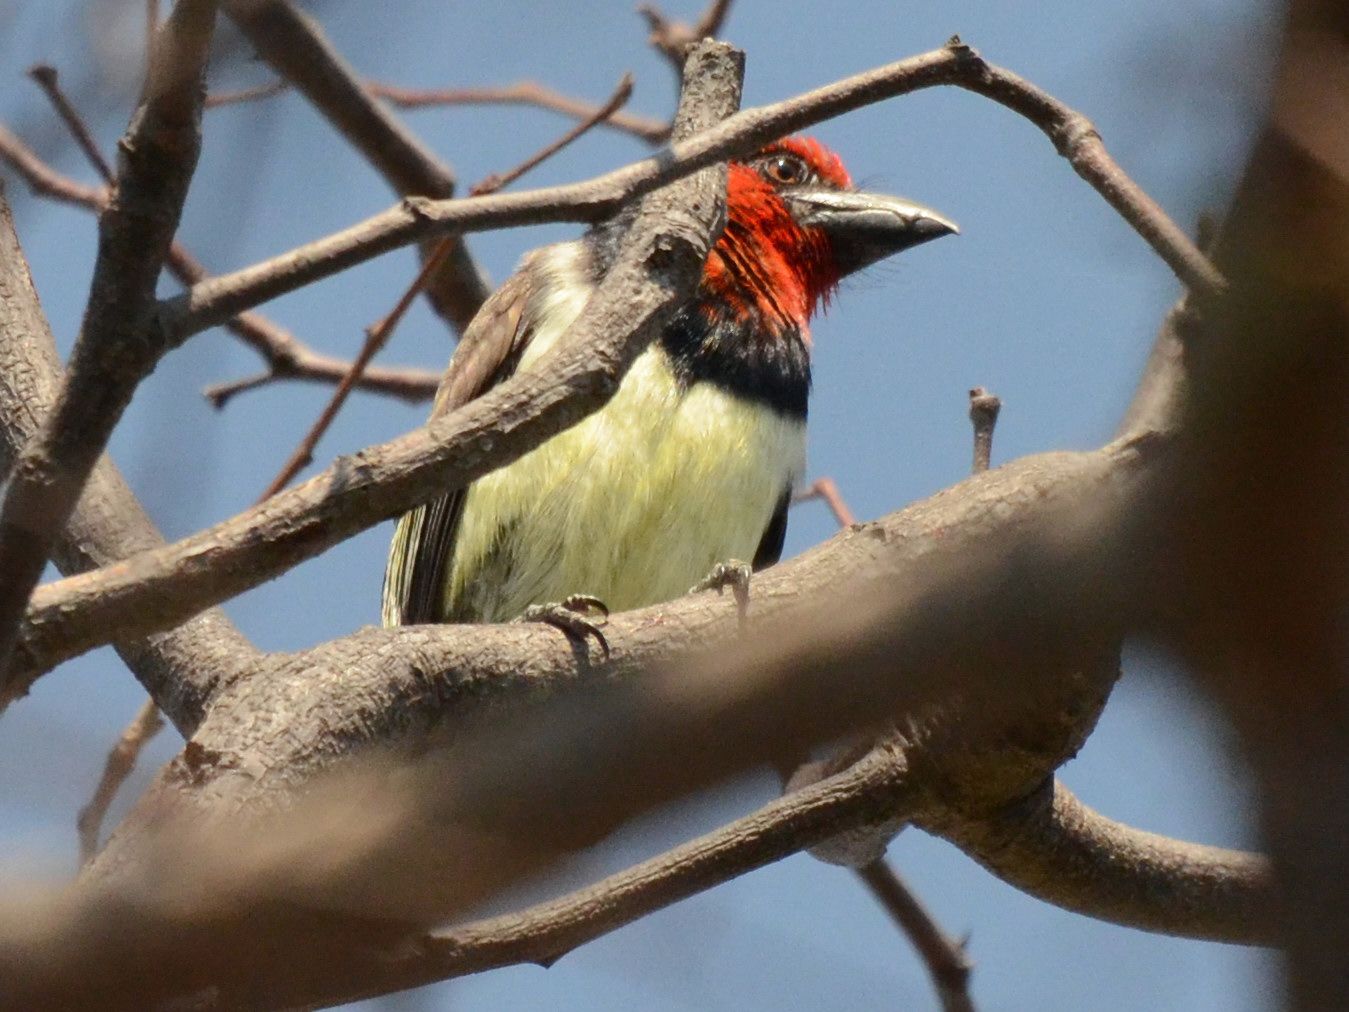 Click picture to see more Black-collared Barbets.